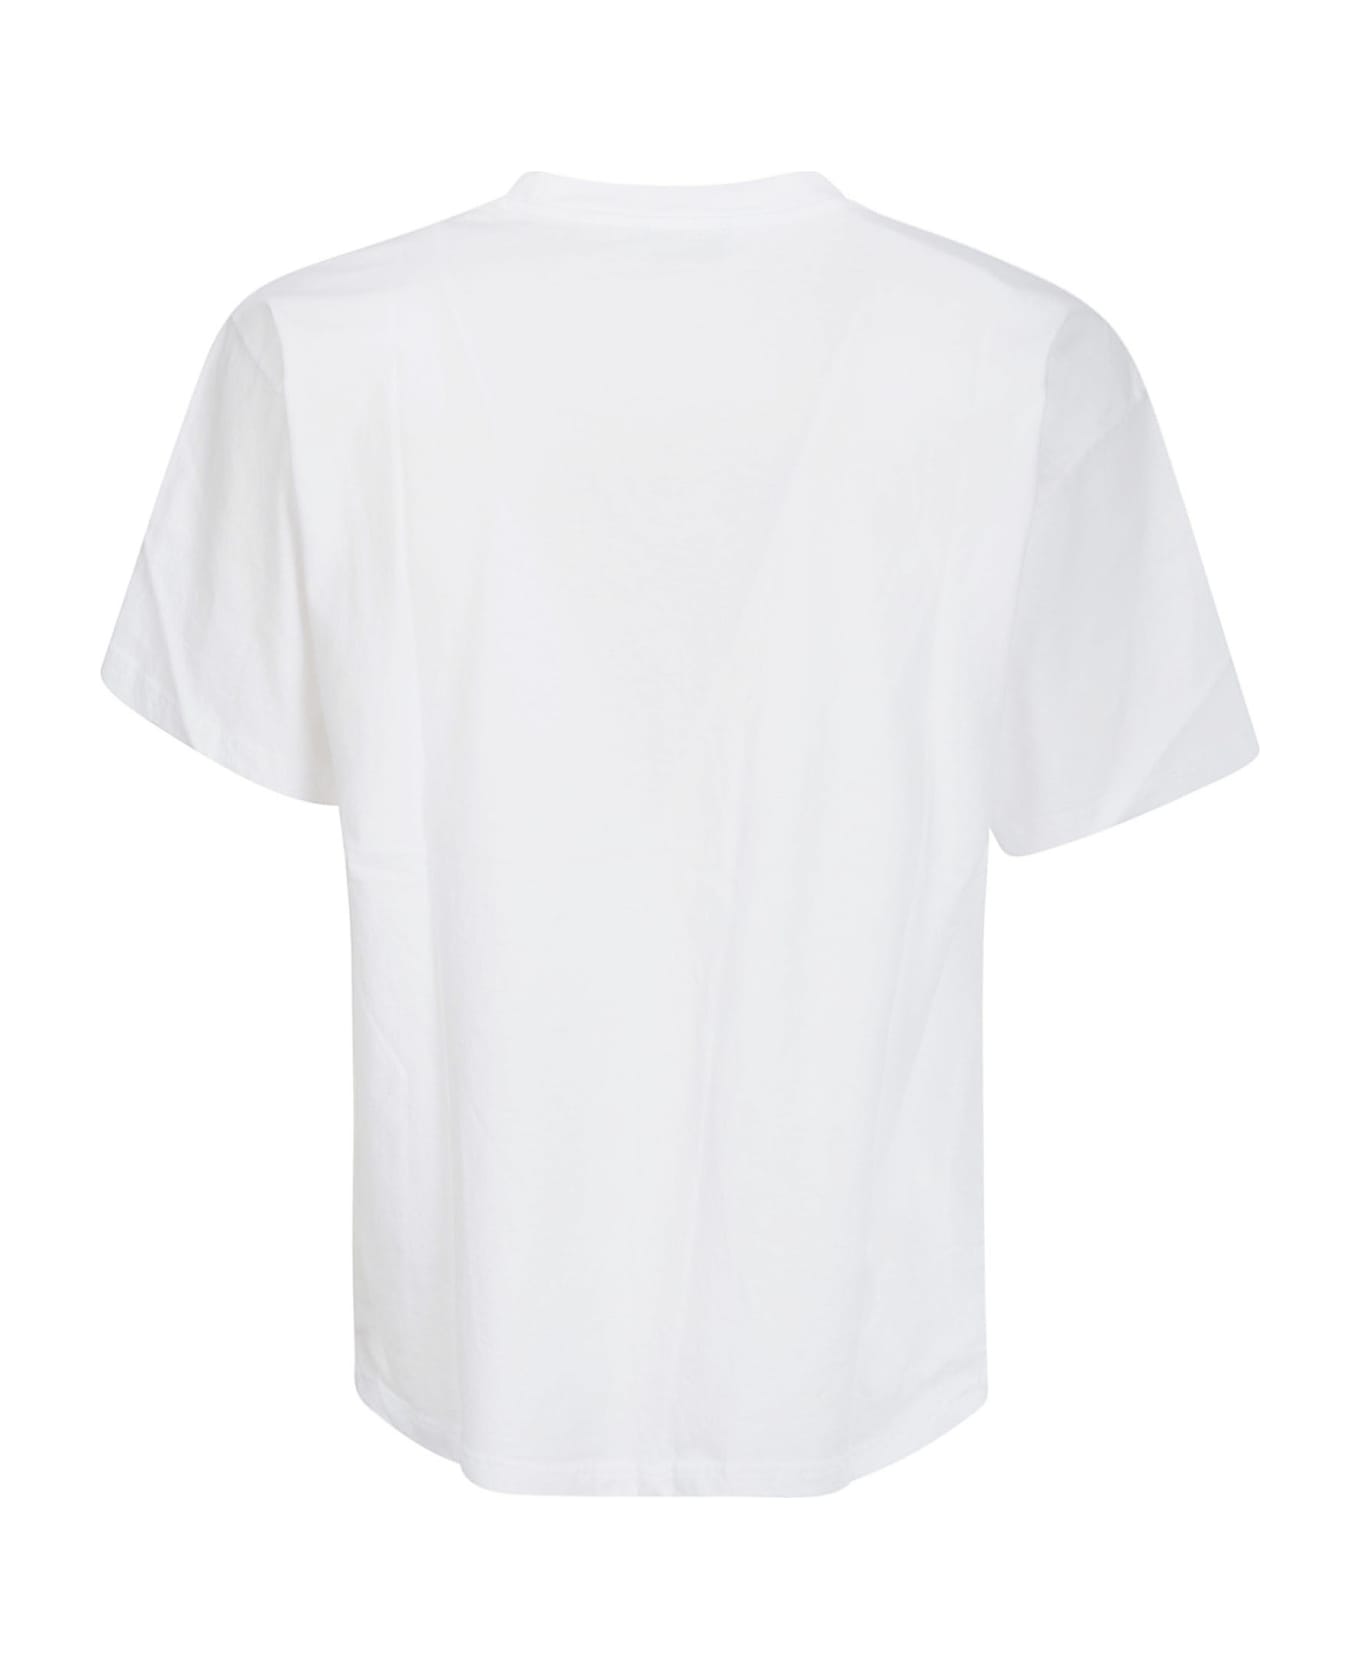 Aries Temple Ss Tee - WHITE Tシャツ